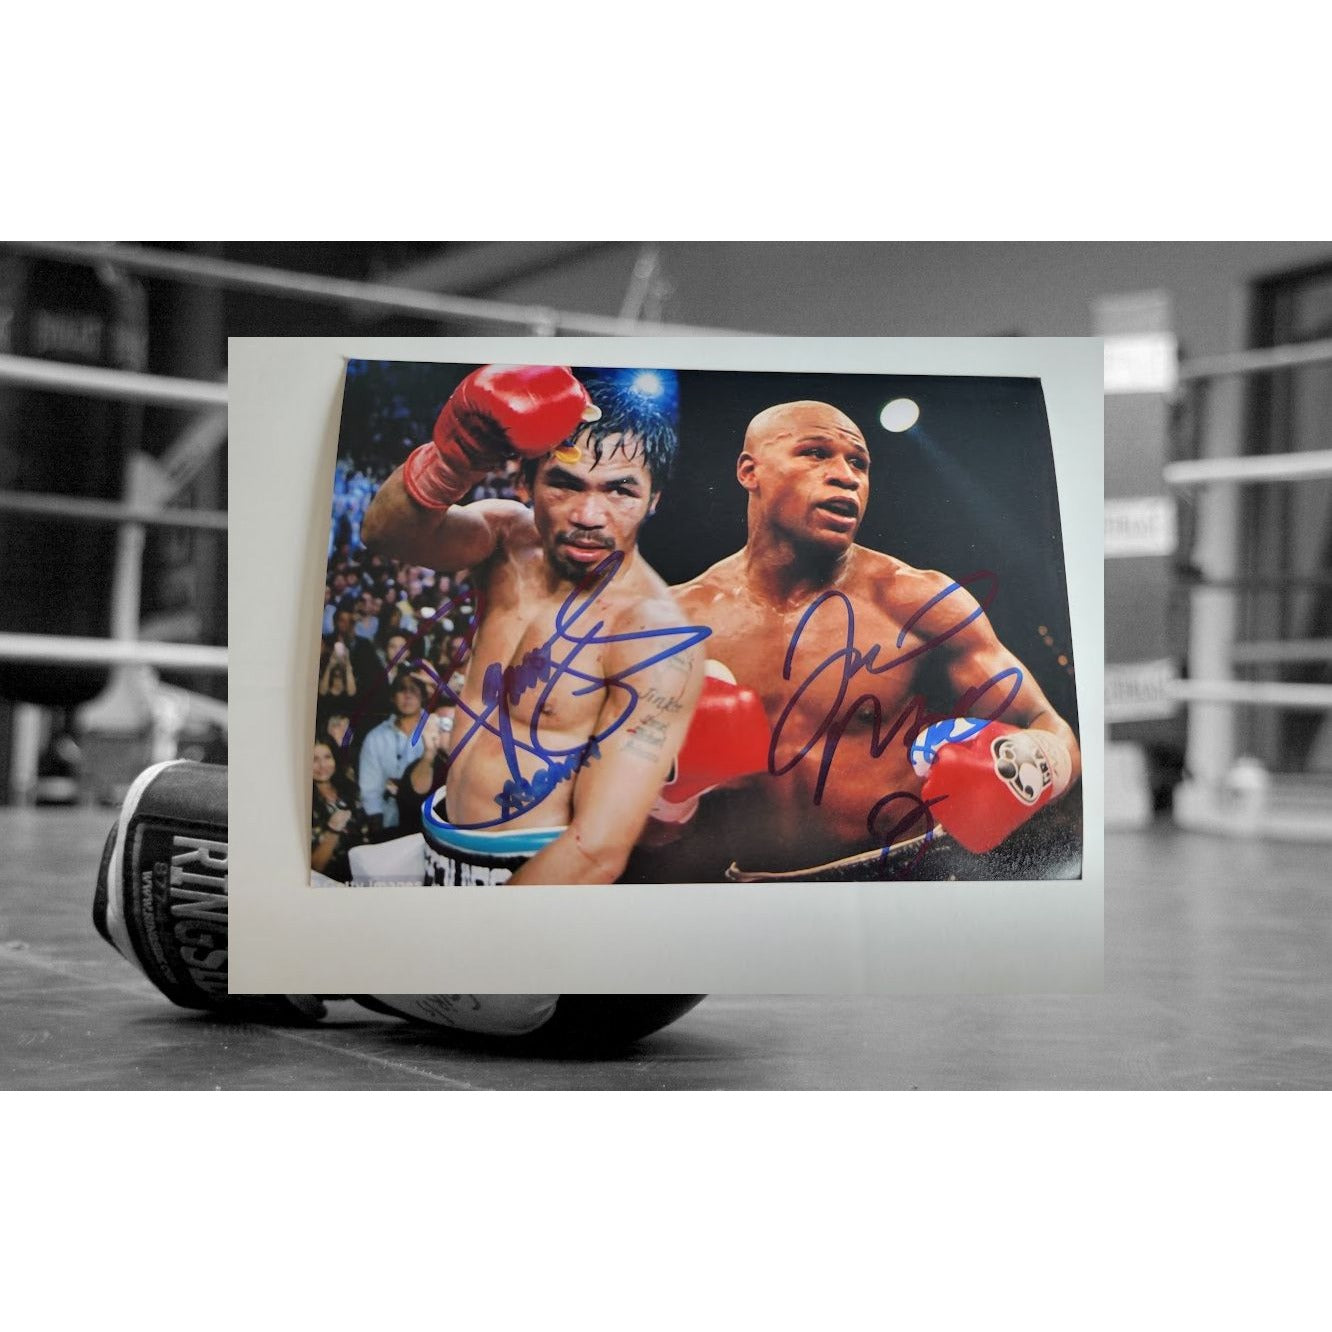 Floyd Mayweather and Manny Pacquiao 5 x 7 photograph signed